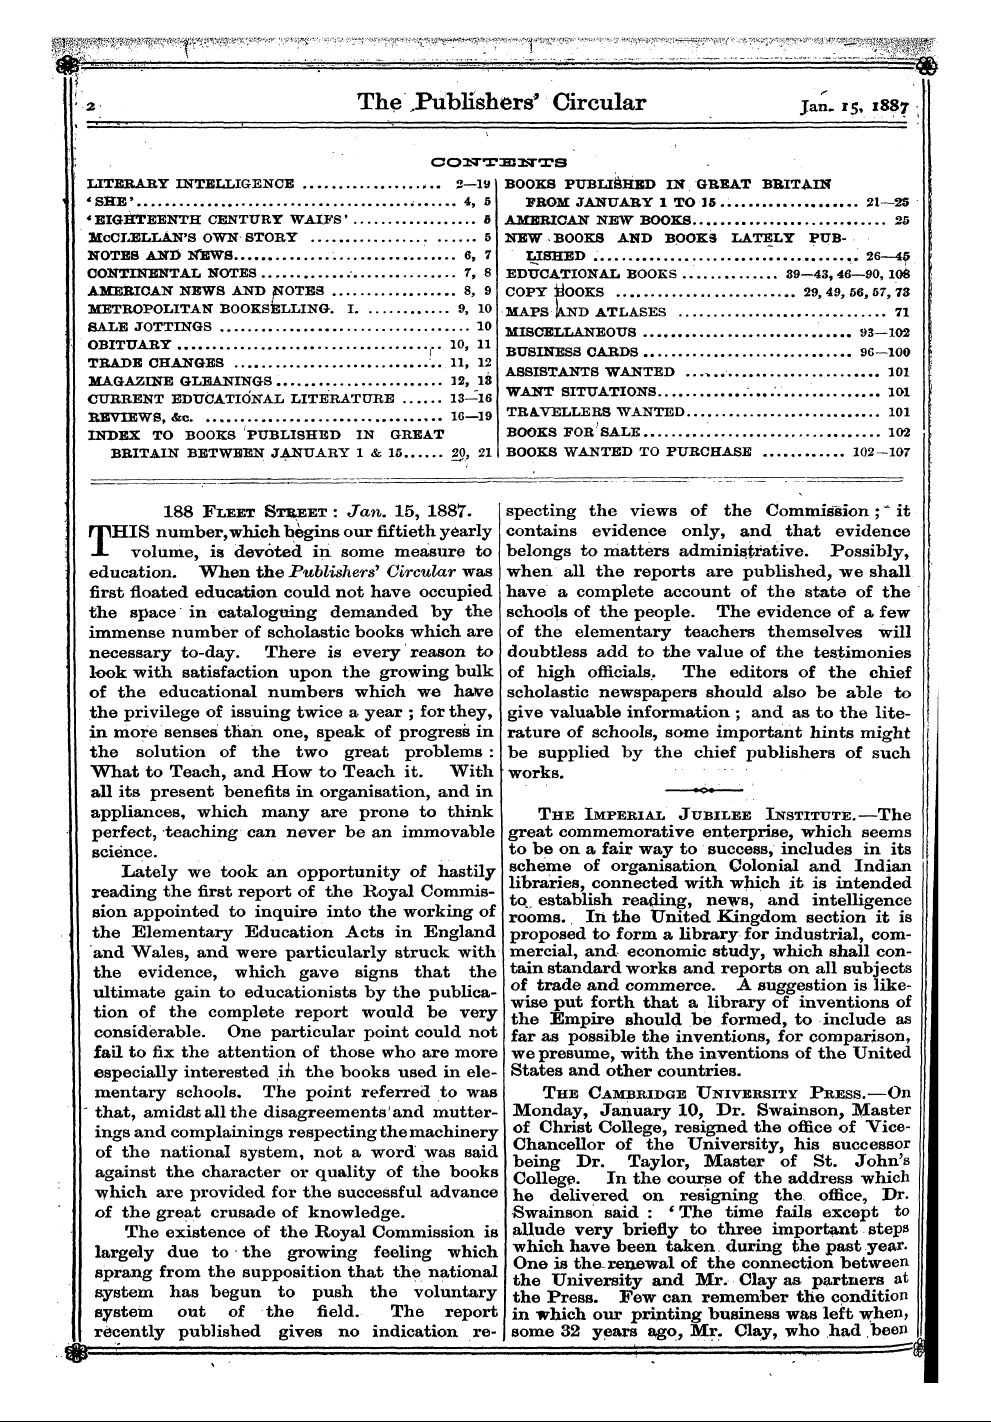 Publishers’ Circular (1880-1890): jS F Y, 1st edition - I • ¦¦ -¦"¦- » - "^~* ' [ Oo^A-R Ass Isrars